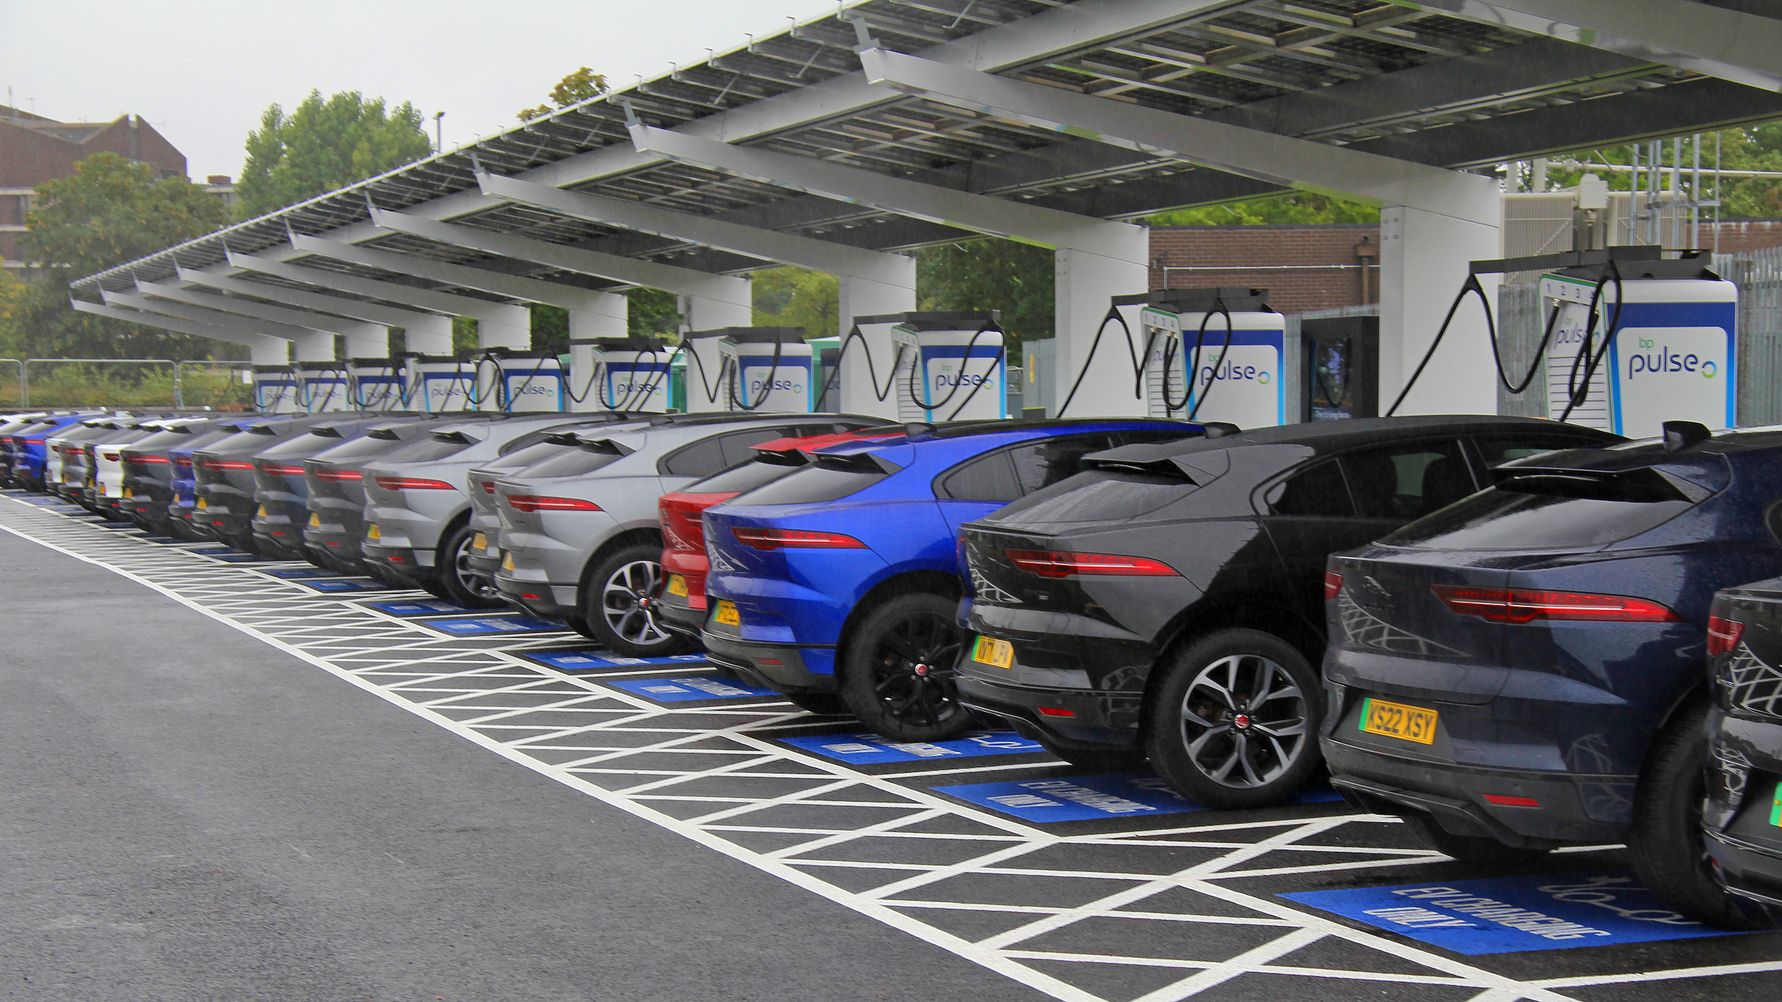 Jaguar supports one of the largest charging stations in Europe